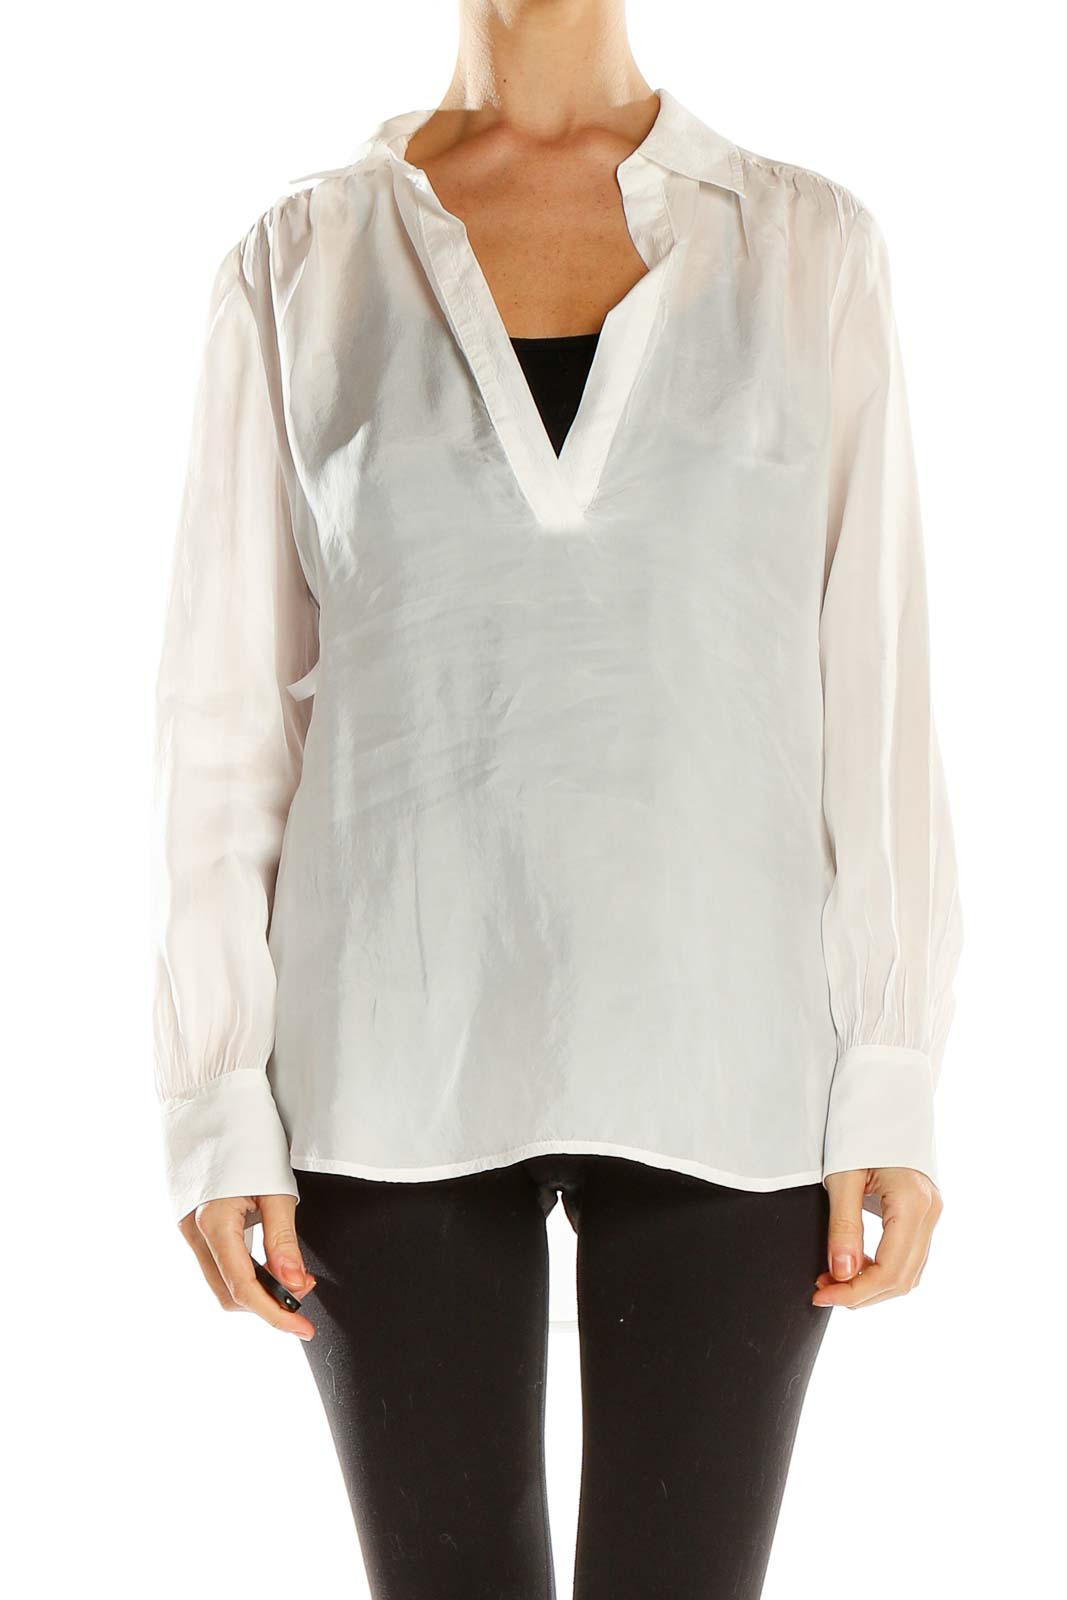 White Sheer Chic Blouse Front